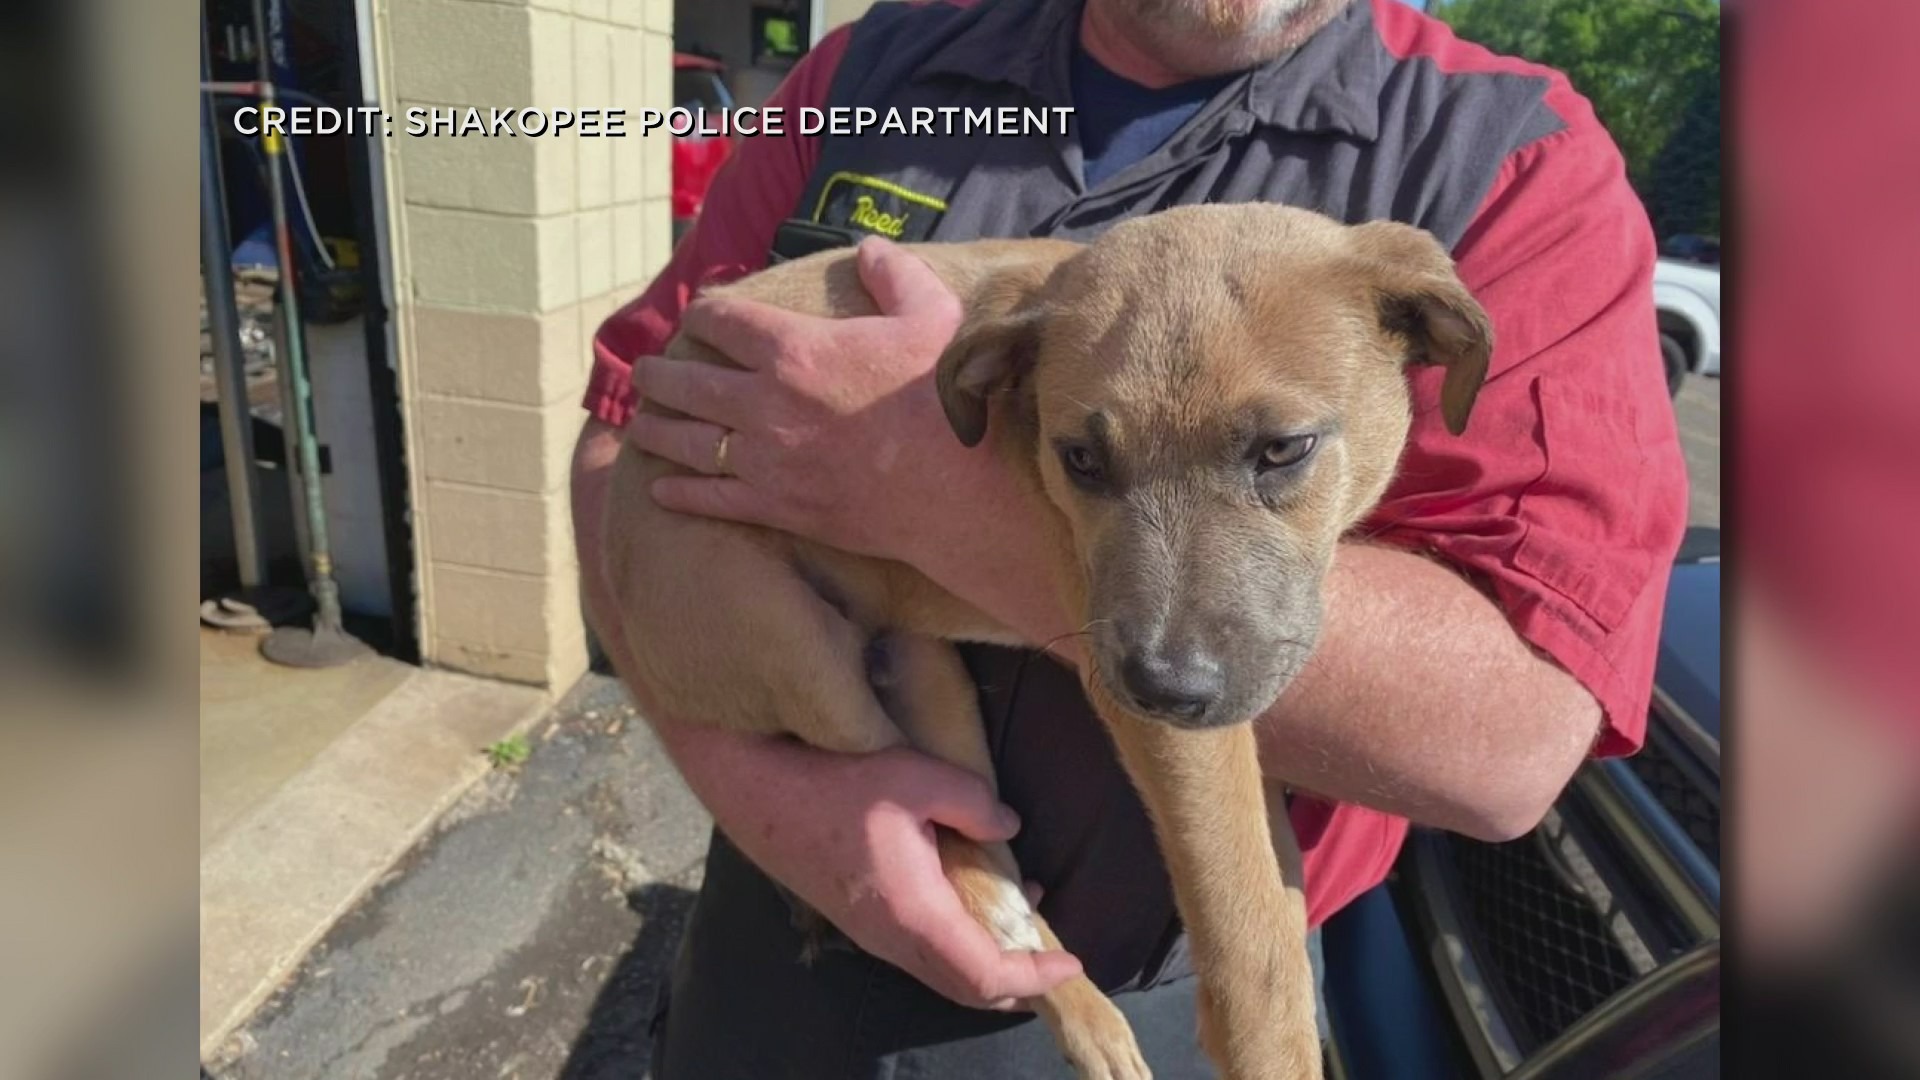 Puppy Rescued After Being Found Abandoned, Injured Inside Shakopee Dumpster